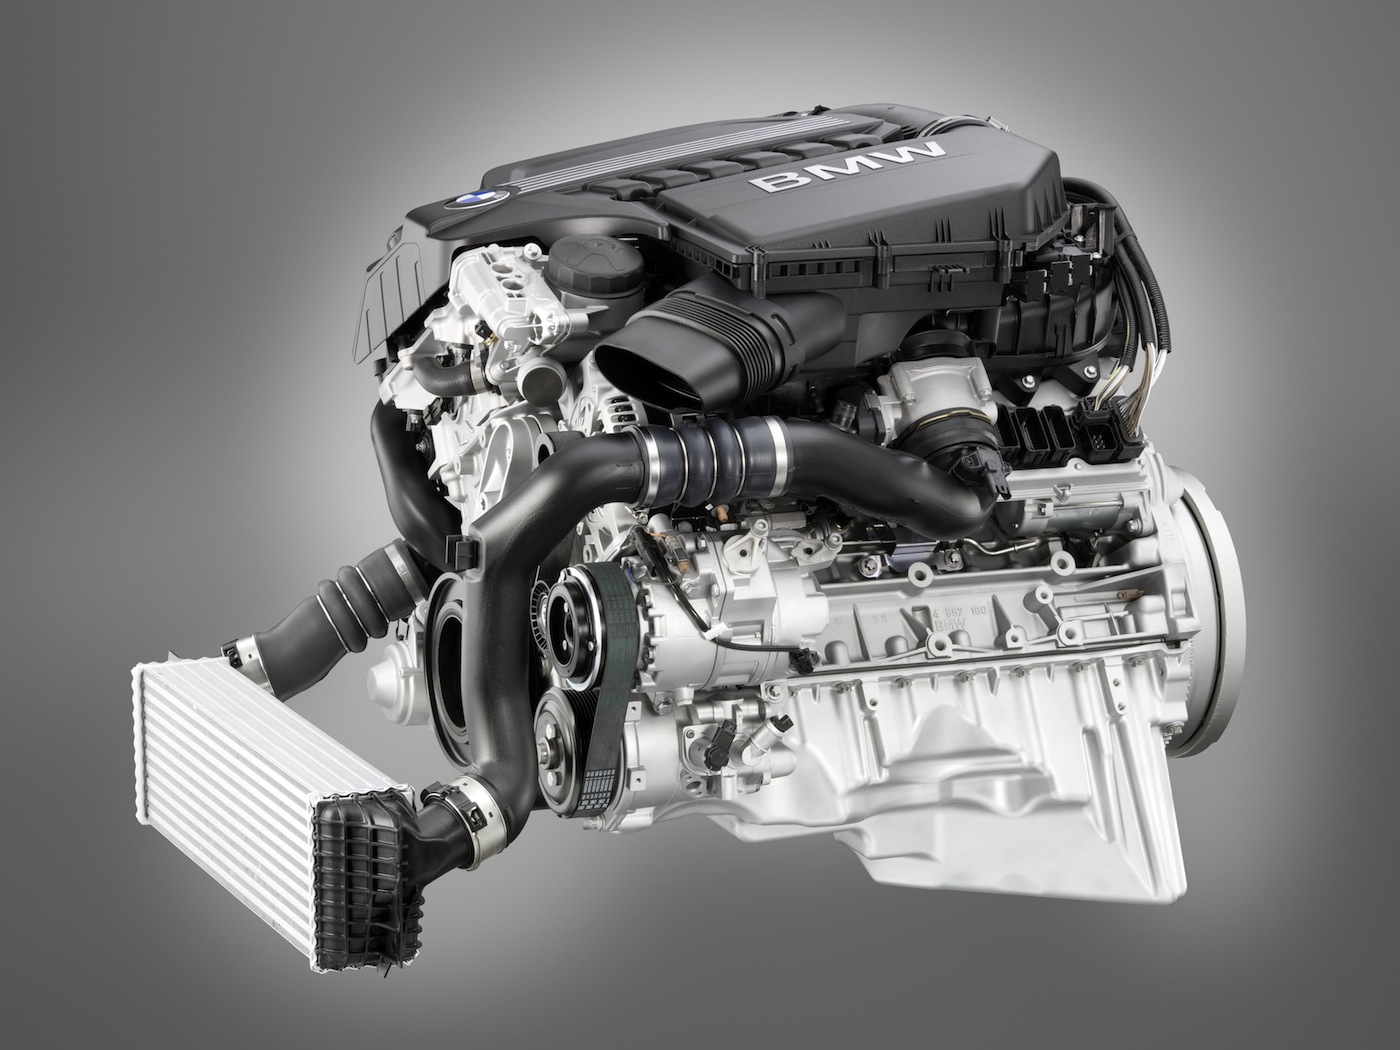 BMW N55 Engine Wins 2014 Engine of the Year Award 2.5-3.0L Category